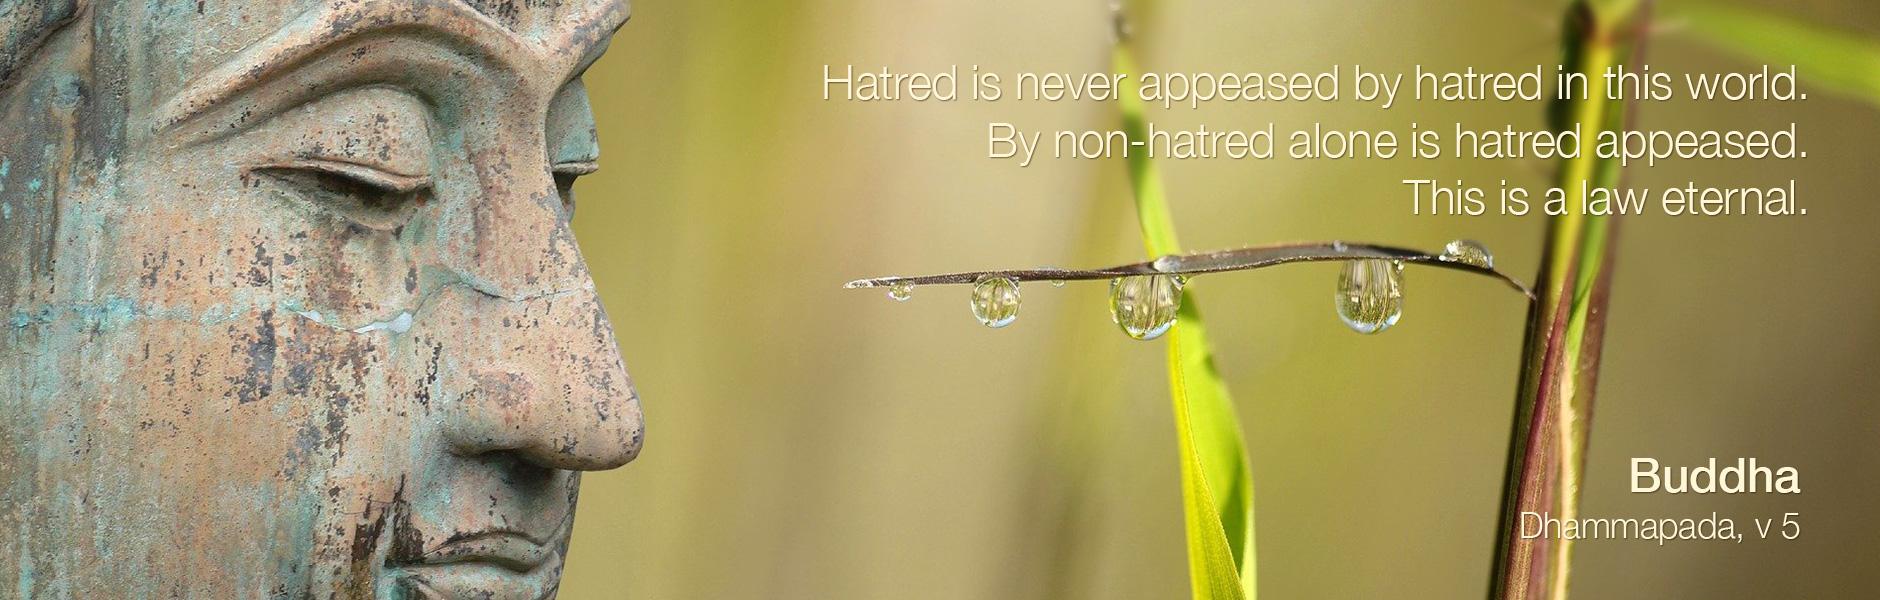 Hatred is never appeased by hatred in this world. By non-hatred alone is hatred appeased. This is a law eternal.